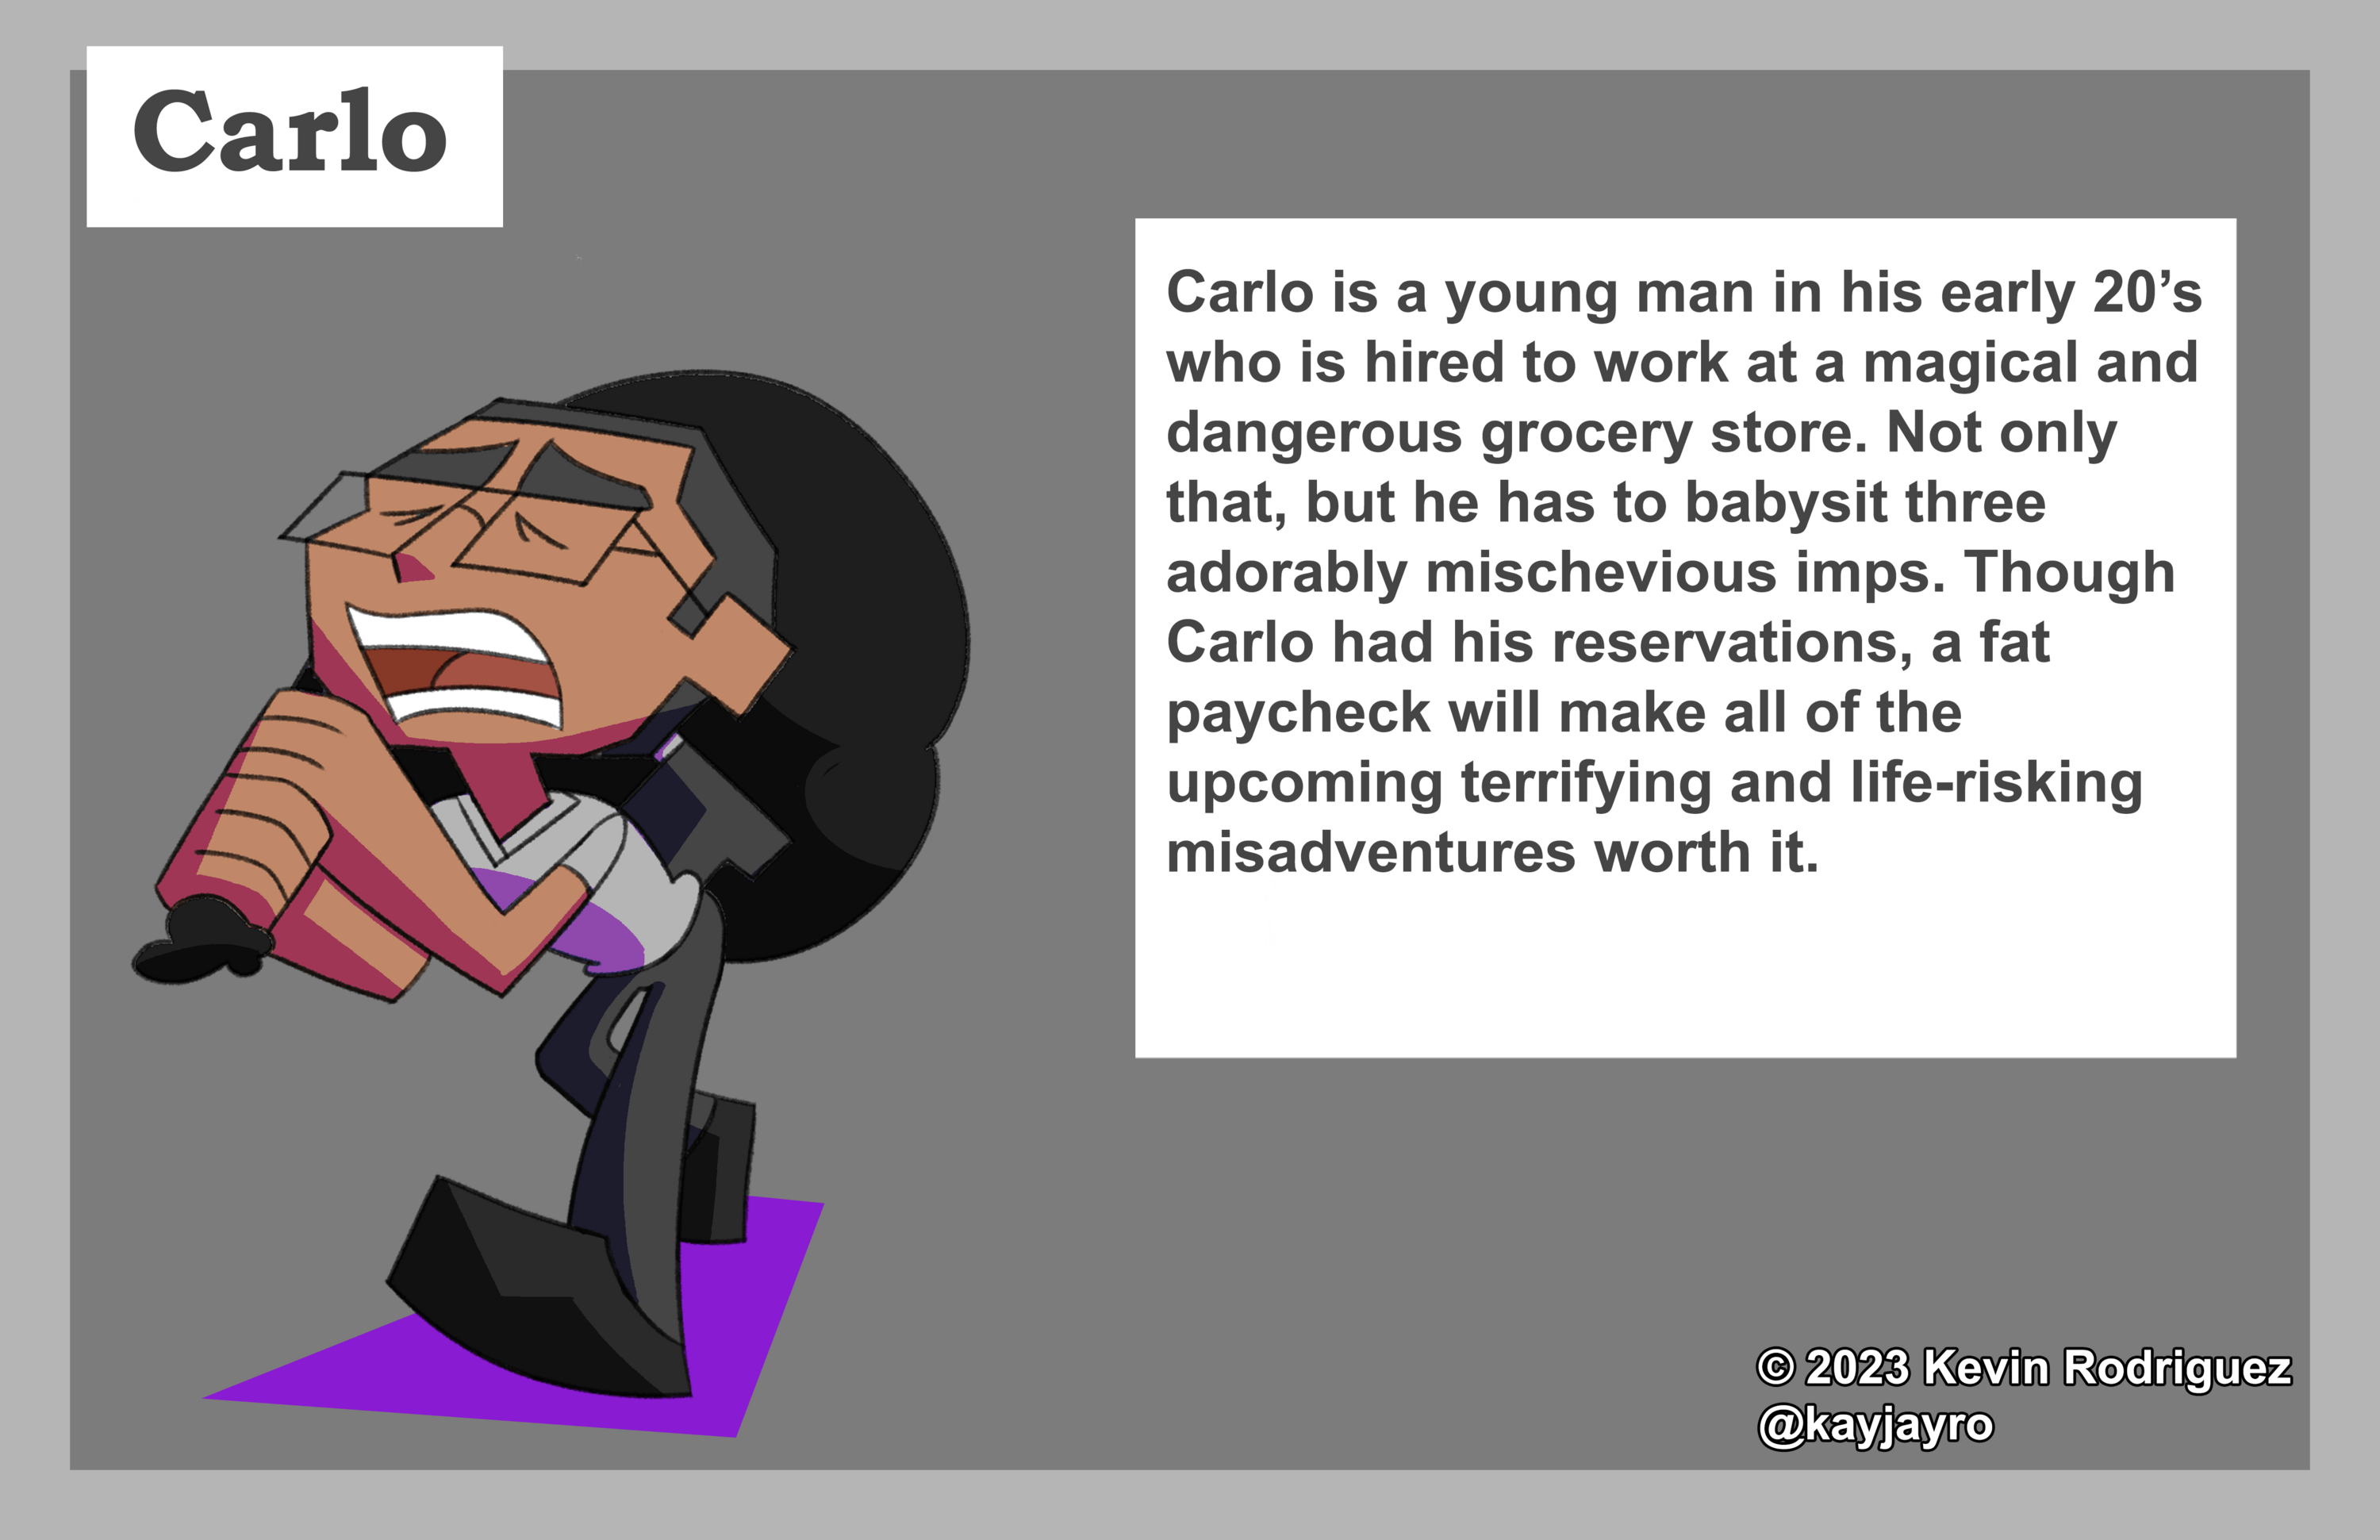 A page describing the character Carlo